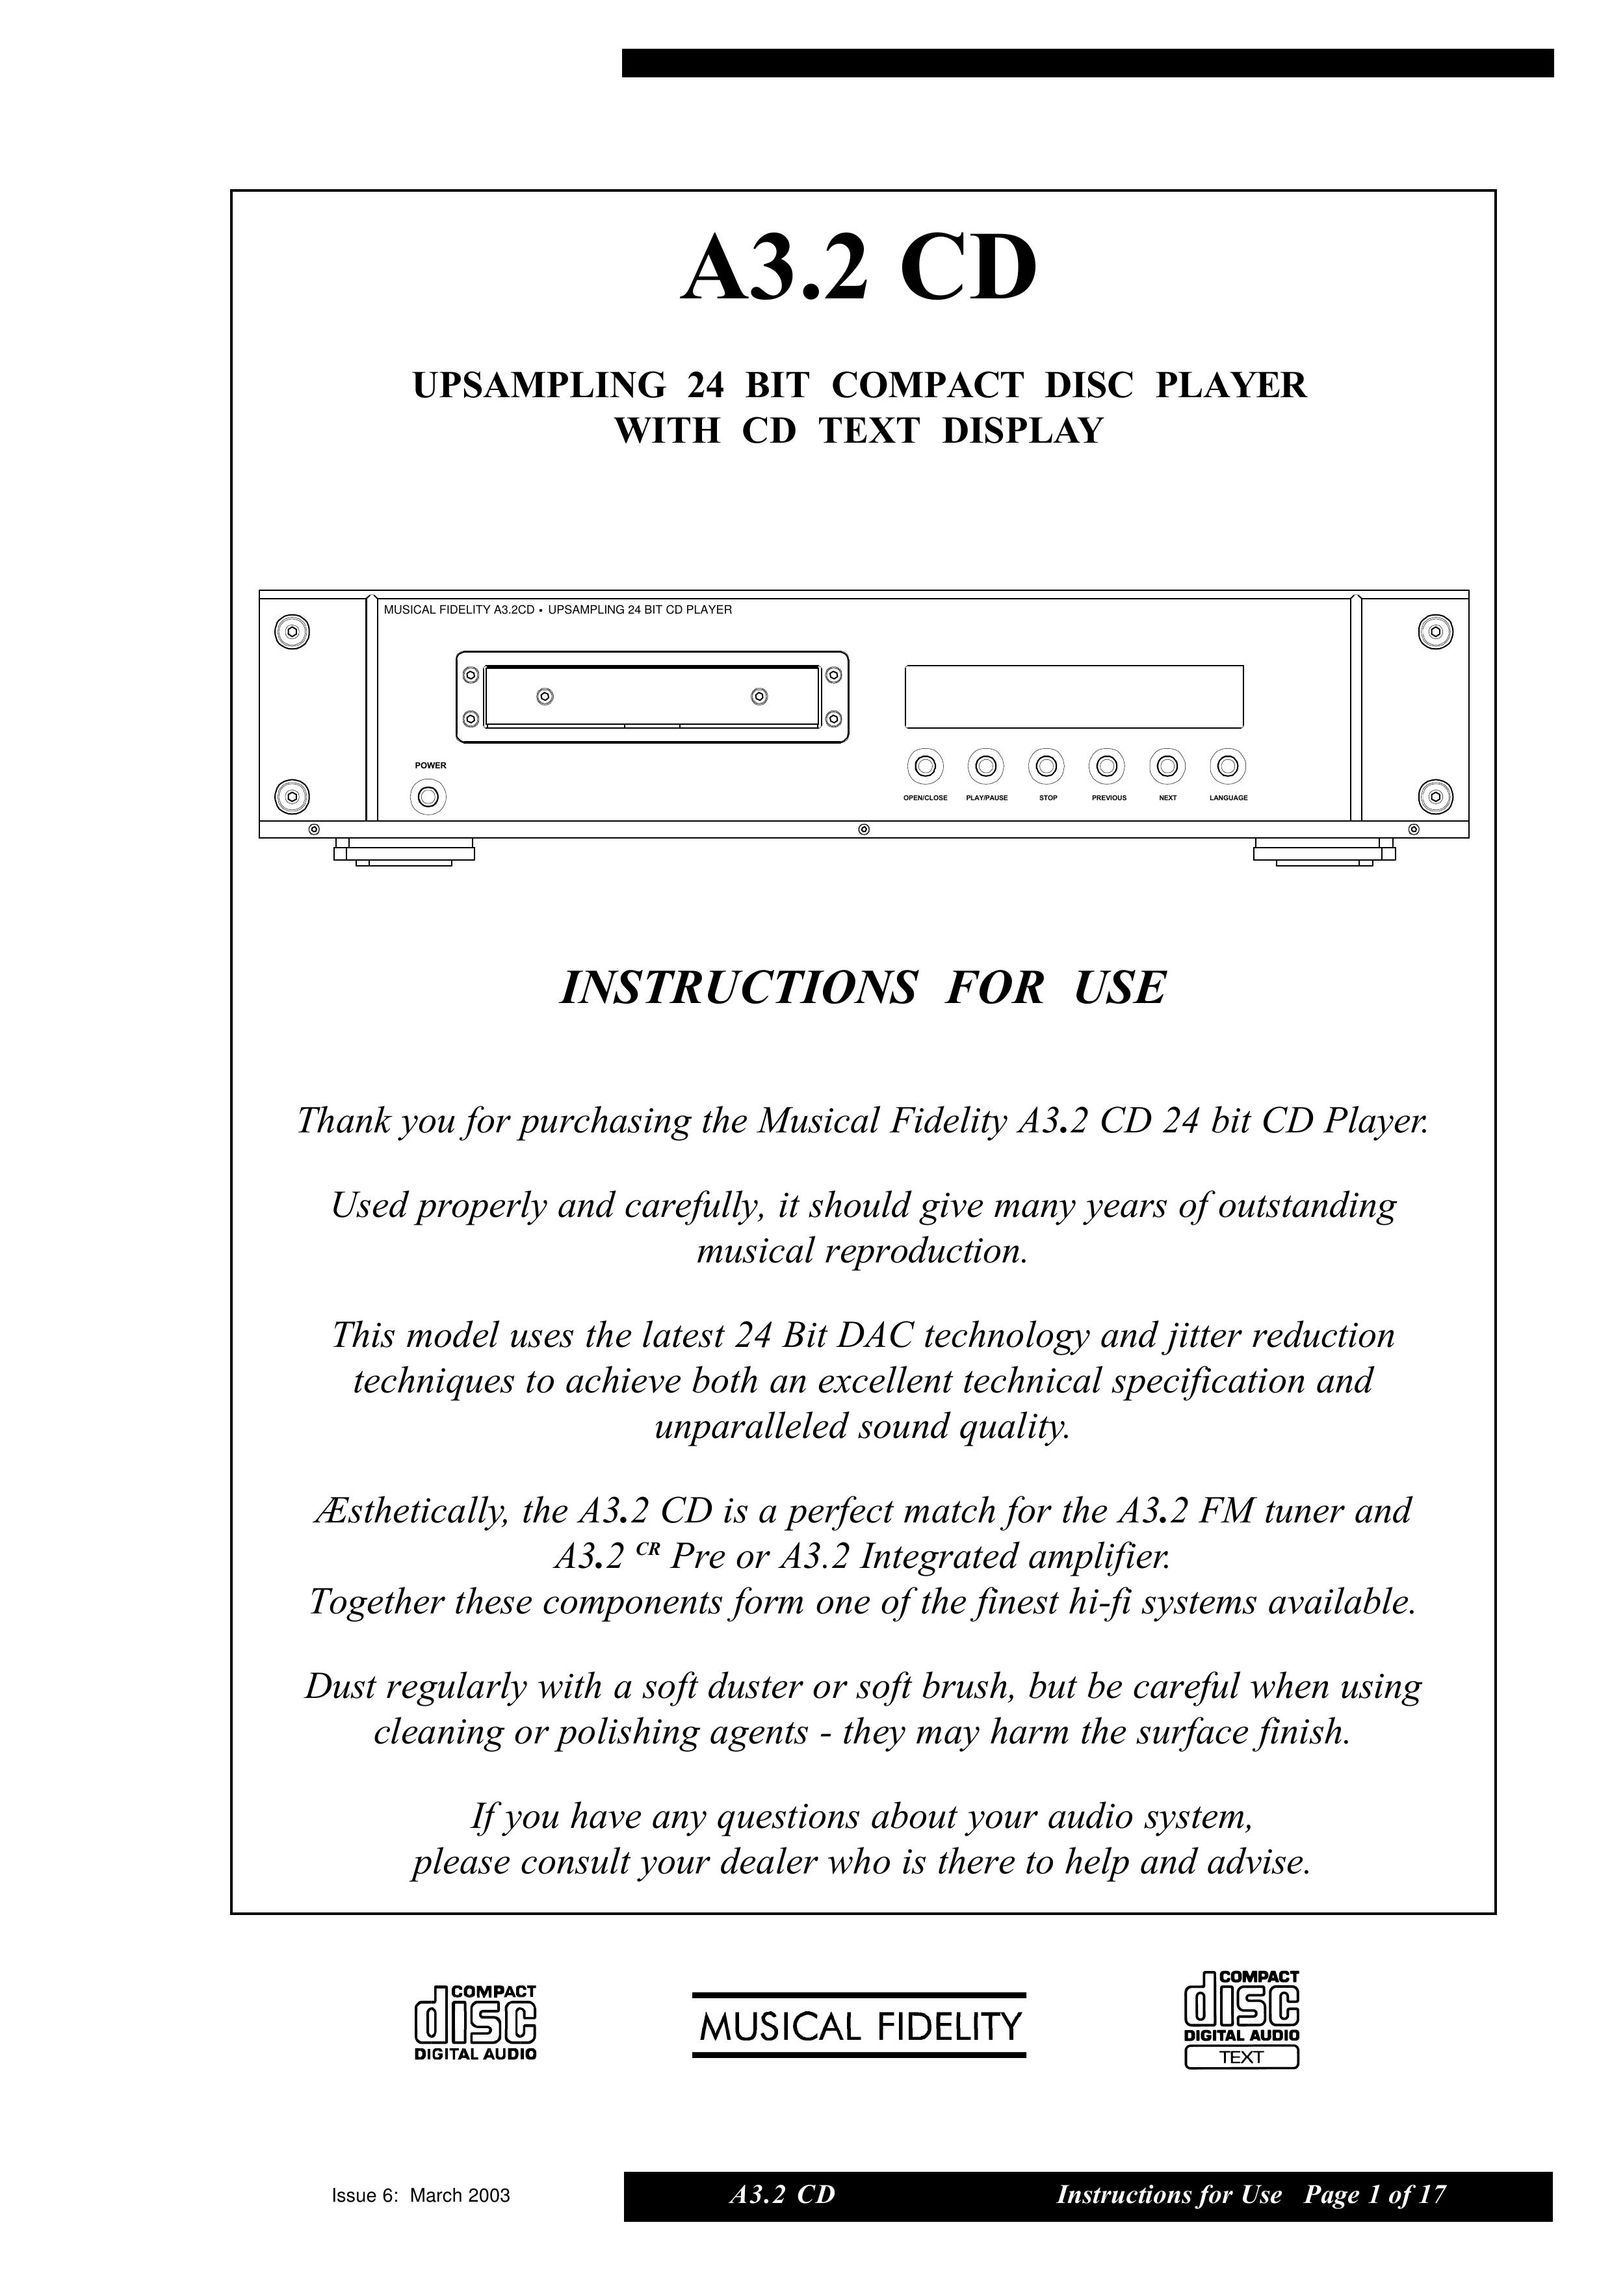 Musical Fidelity A3.2 CD CD Player User Manual